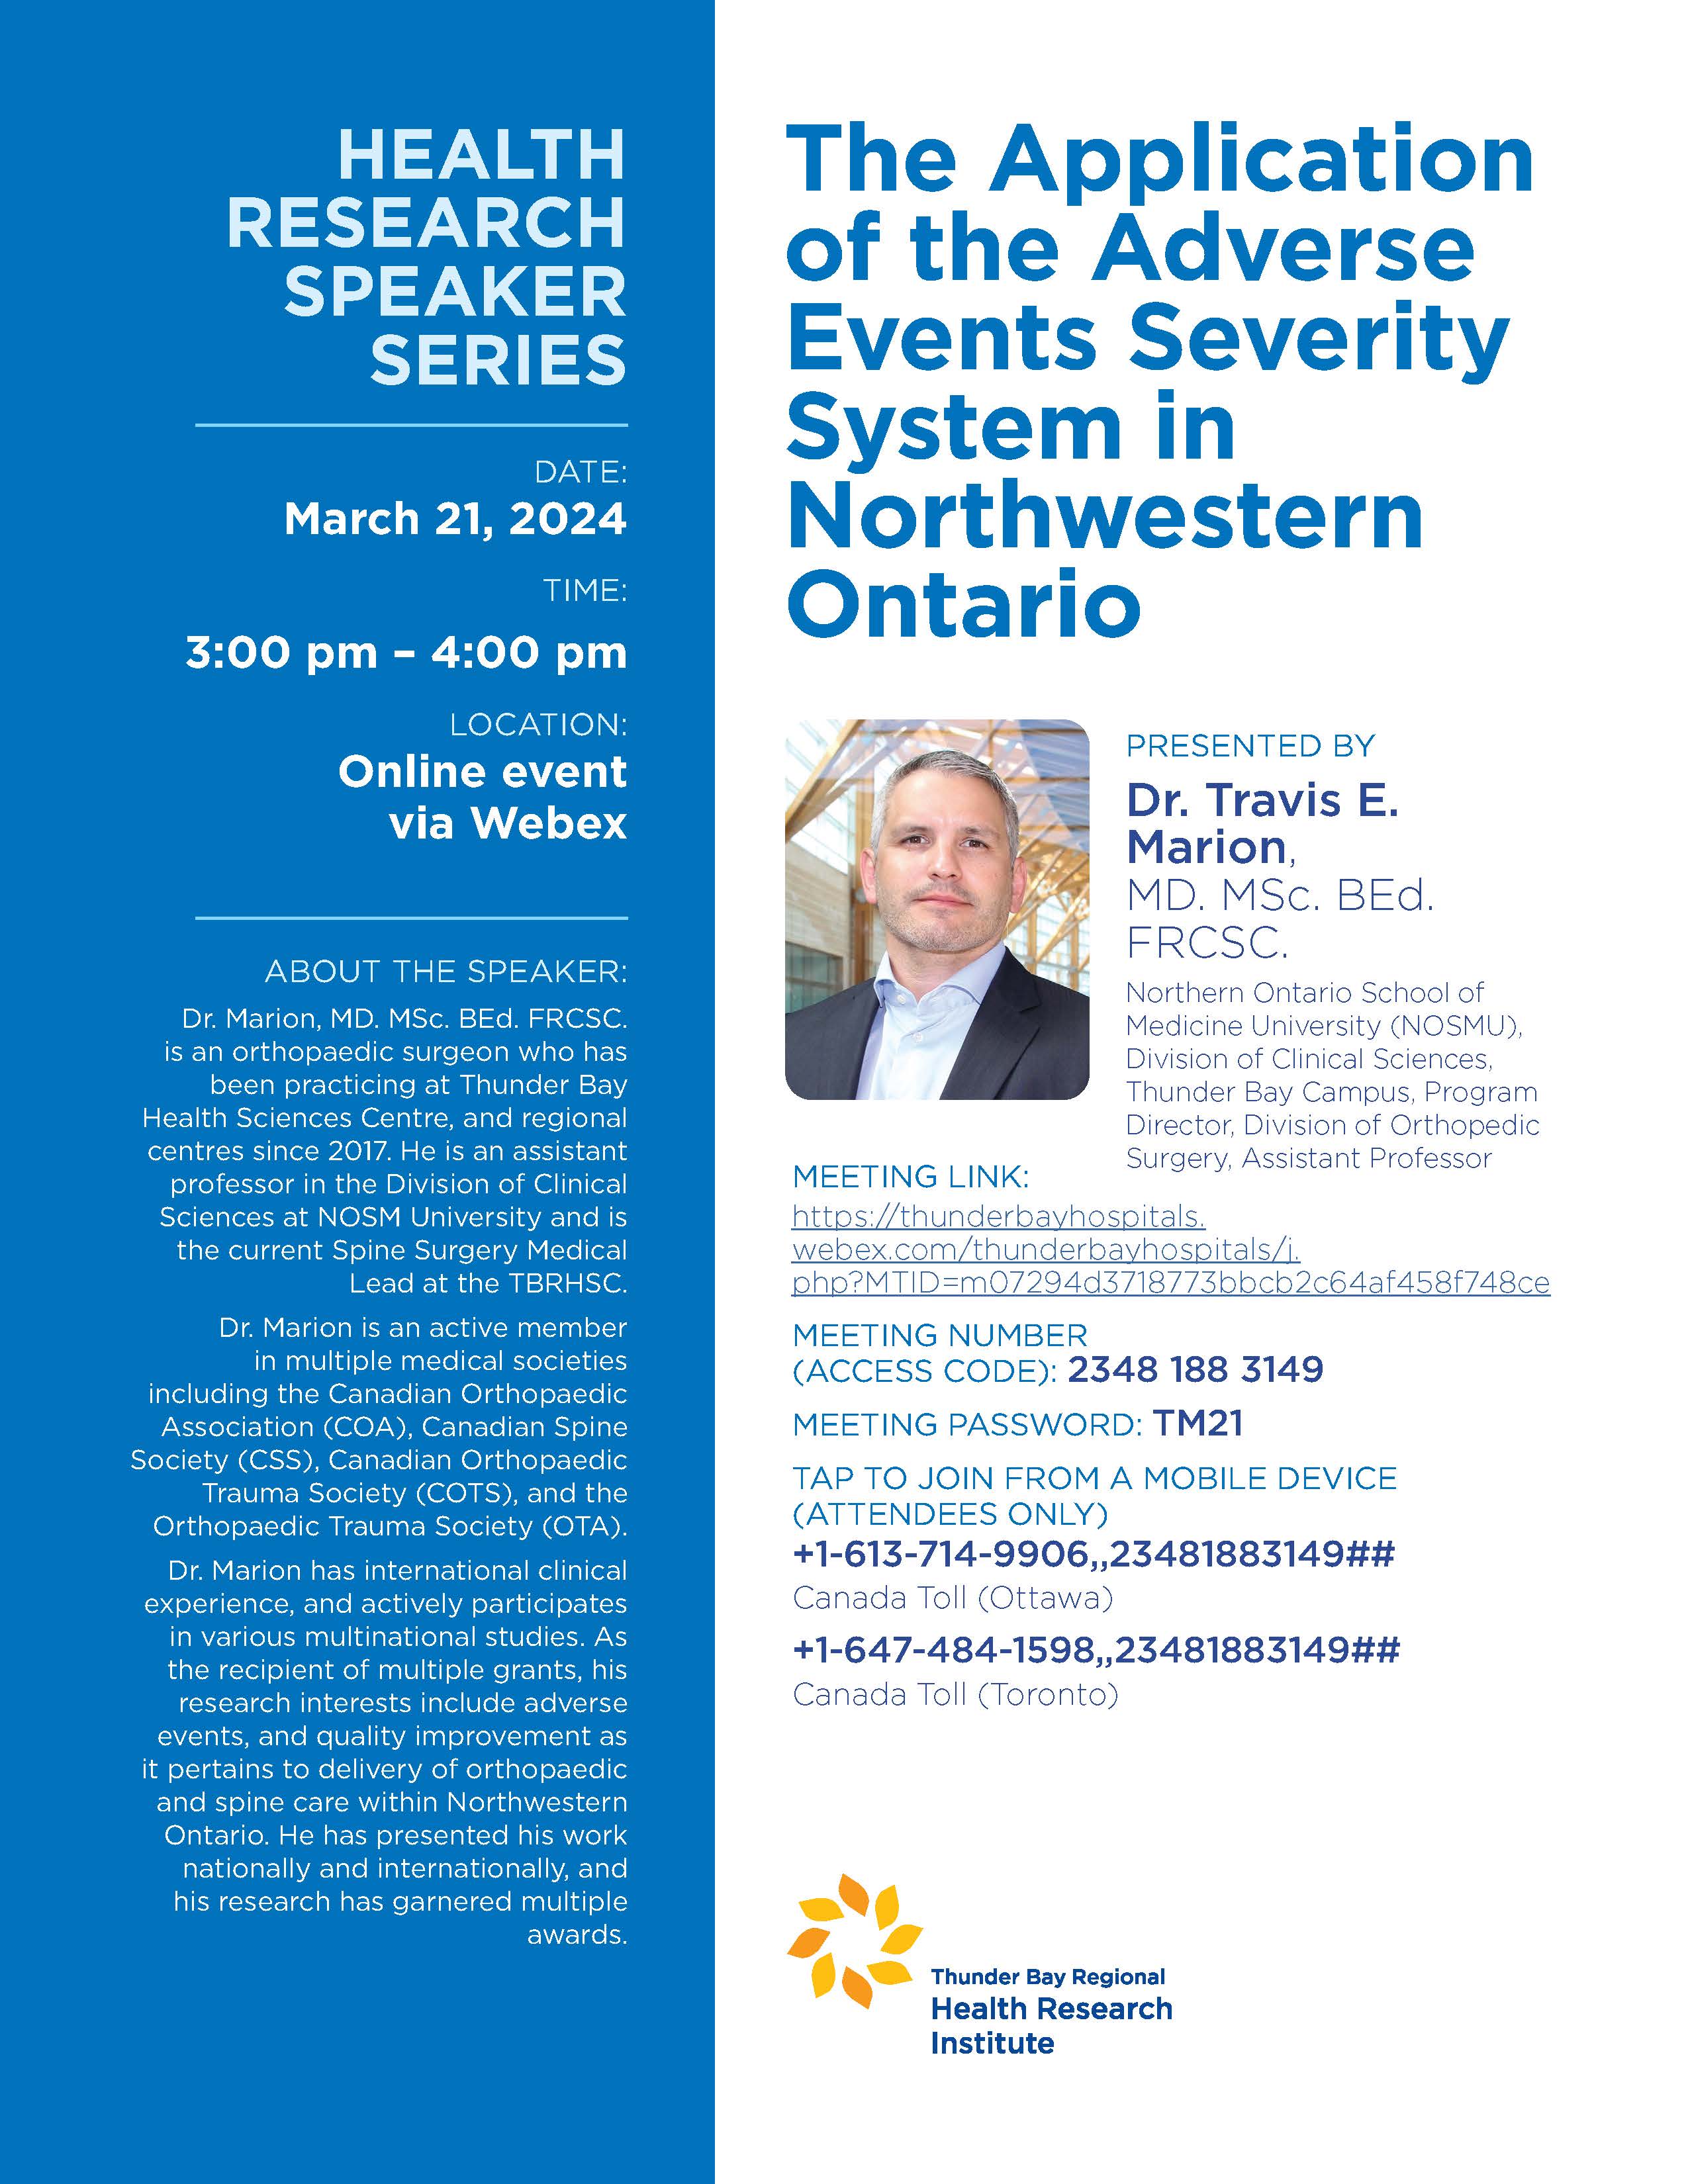 Event Poster for: The Application of the Adverse Events Severity System in Northwestern Ontario